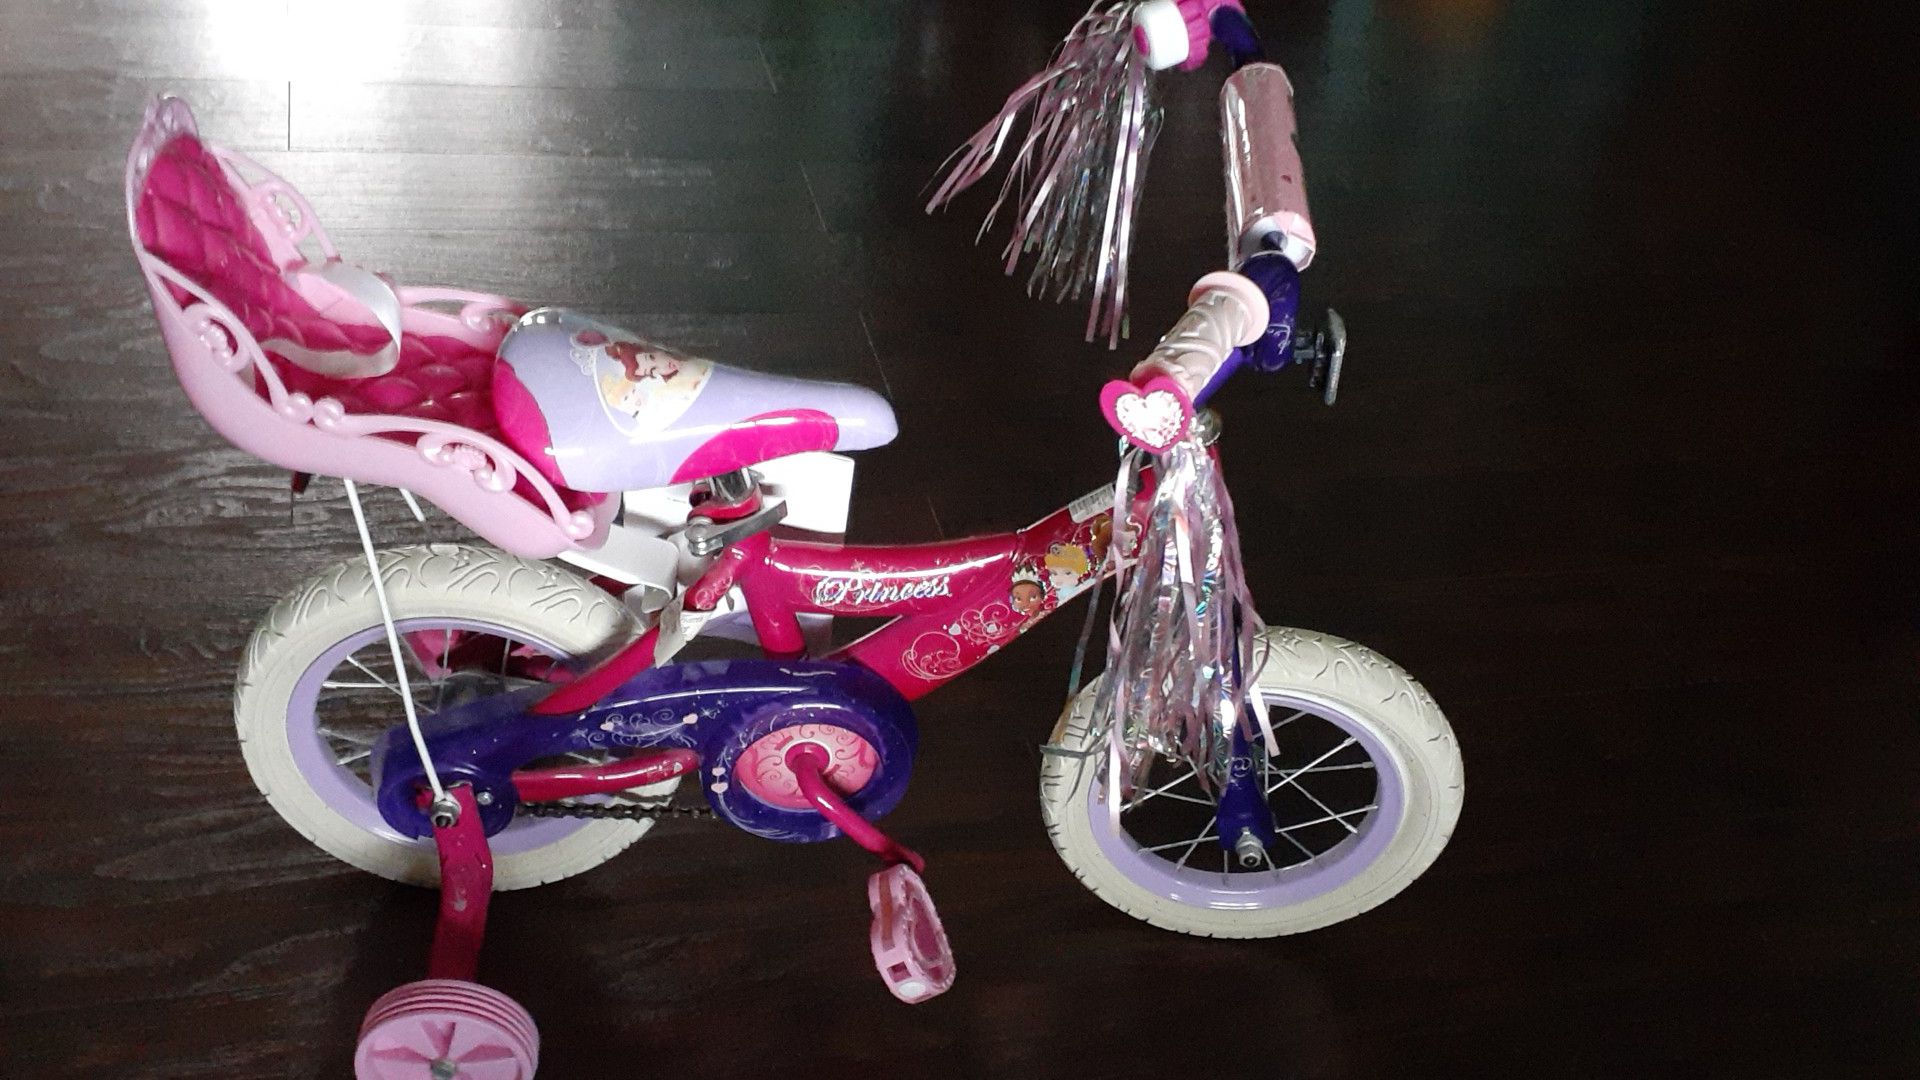 This is a girl bike.